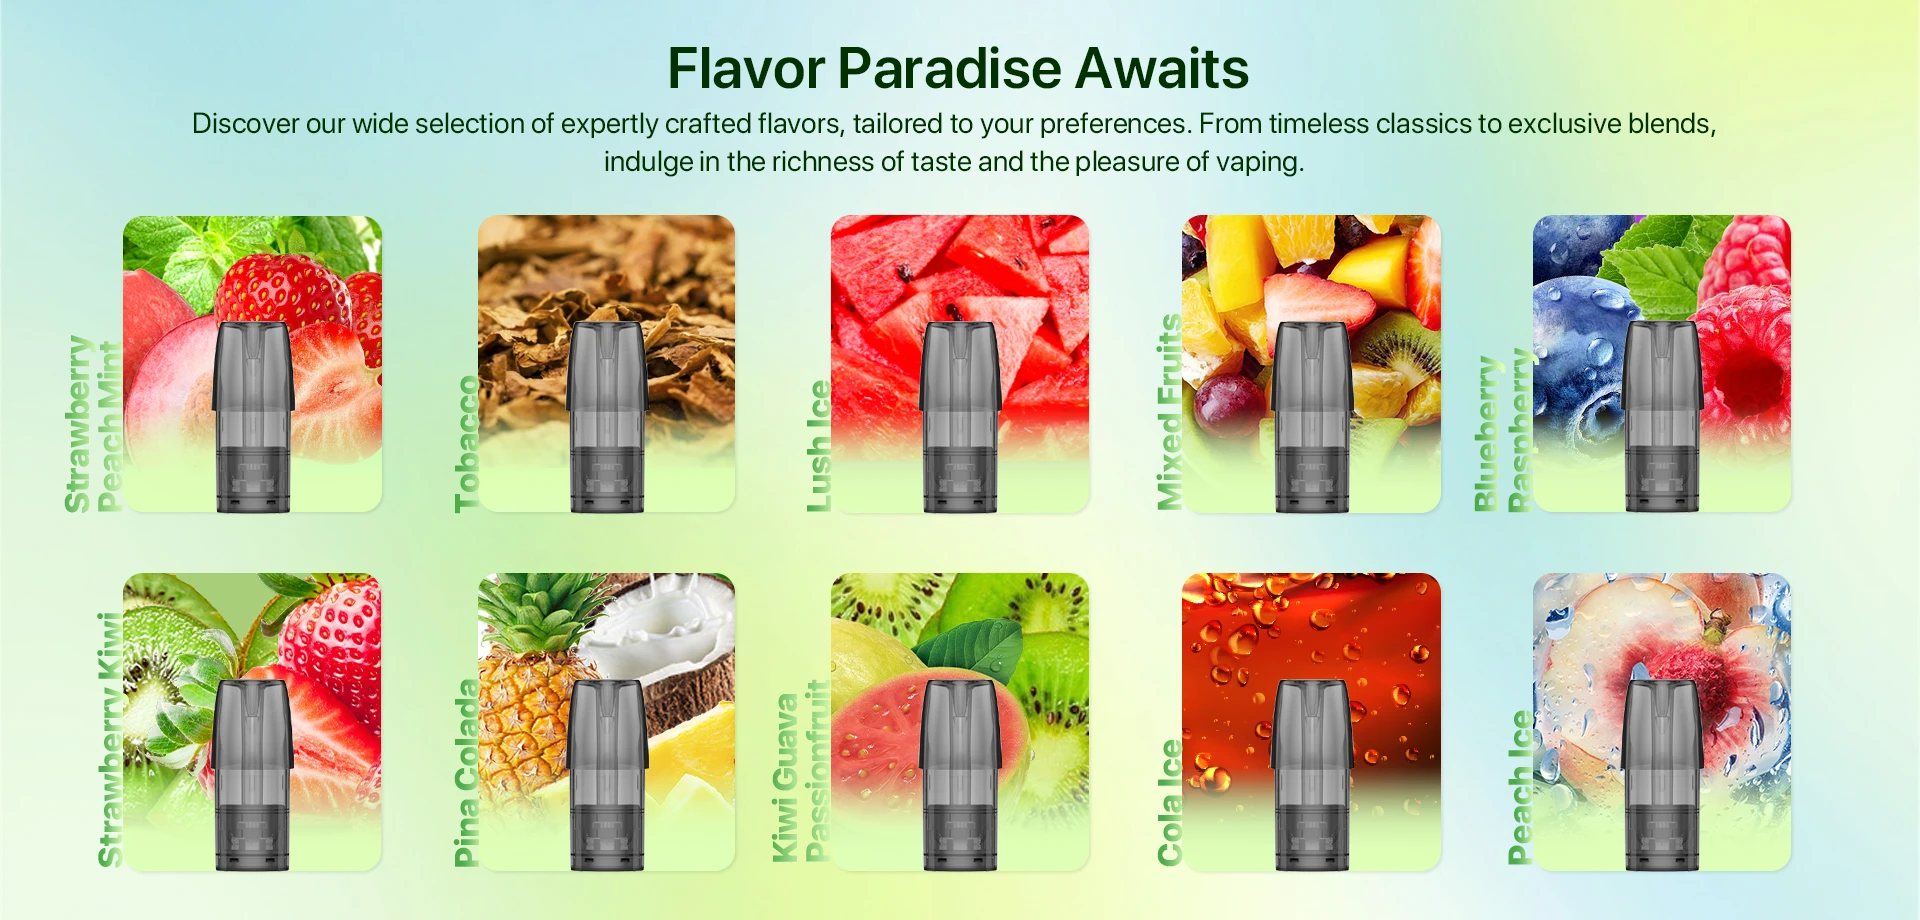 Flavor Paradise Awaits Discover our wide selection of expertly crafted flavors, tailored to your preferences. From timeless classics to exclusive blends, indulge in the richness of taste and the pleasure of vaping.